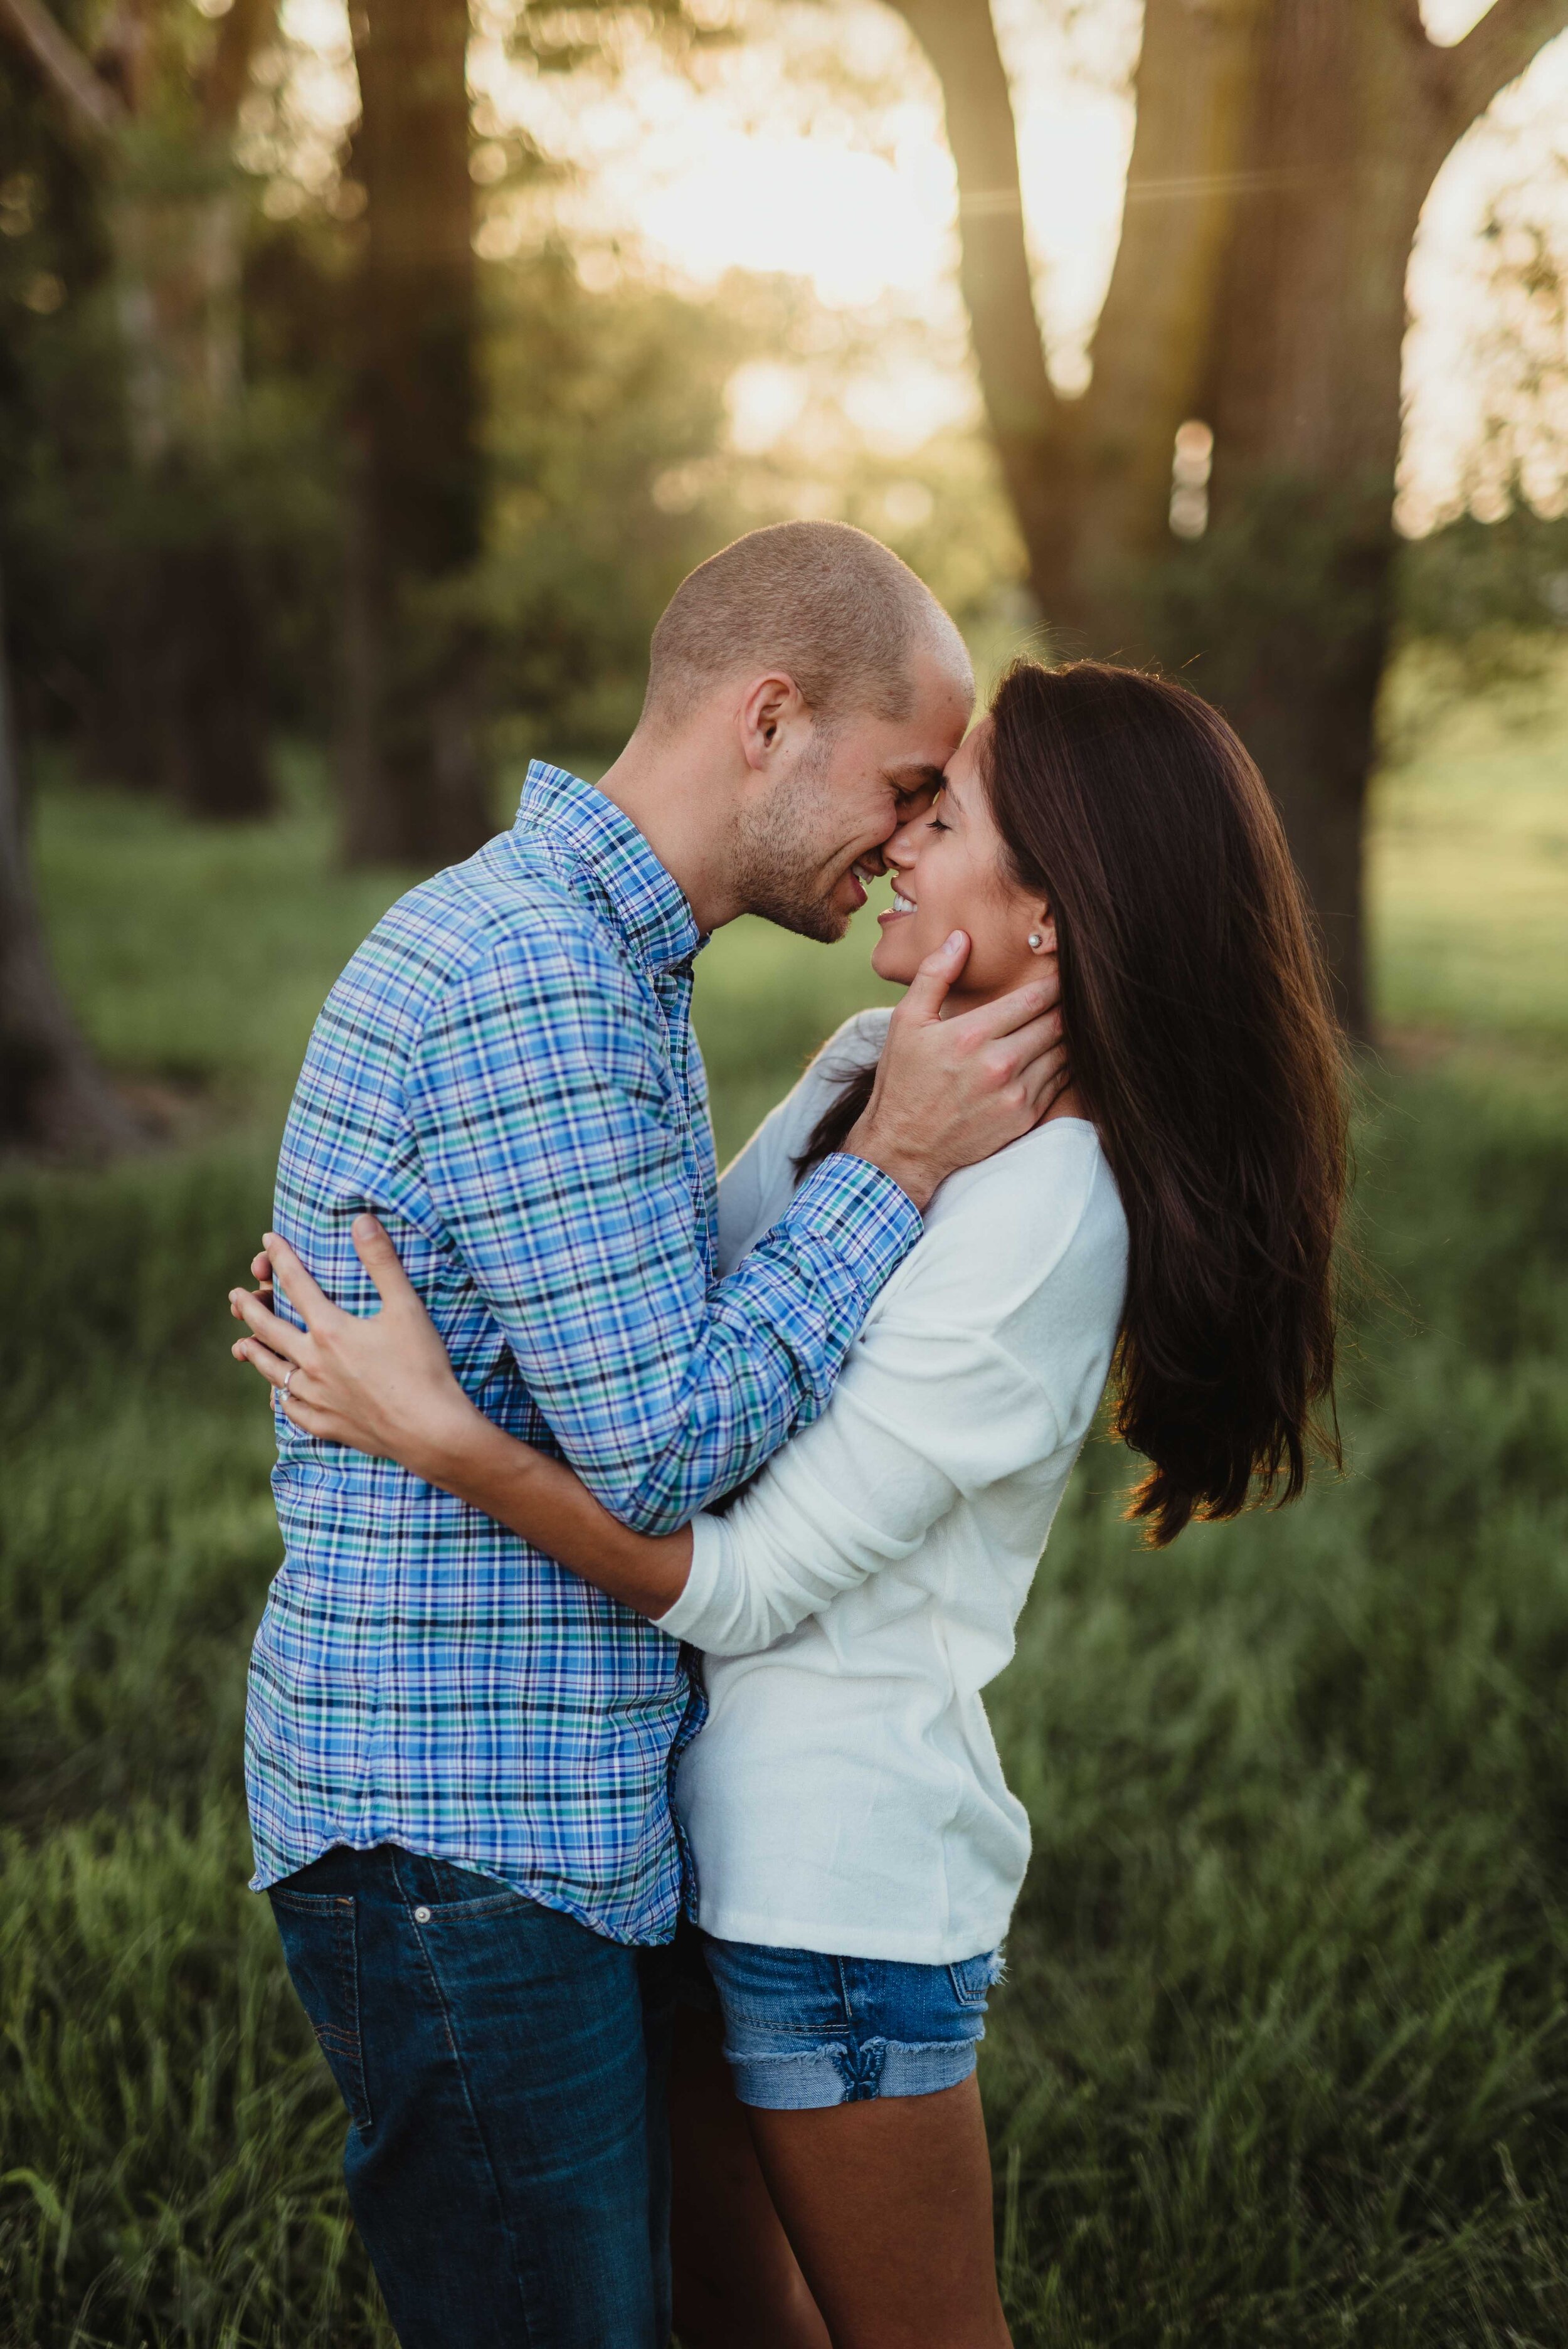 The almost kiss during their engagement session in Lafayette, Indiana. Kelly McPhail Photography is a premier engagement and wedding photographer NW Indiana.